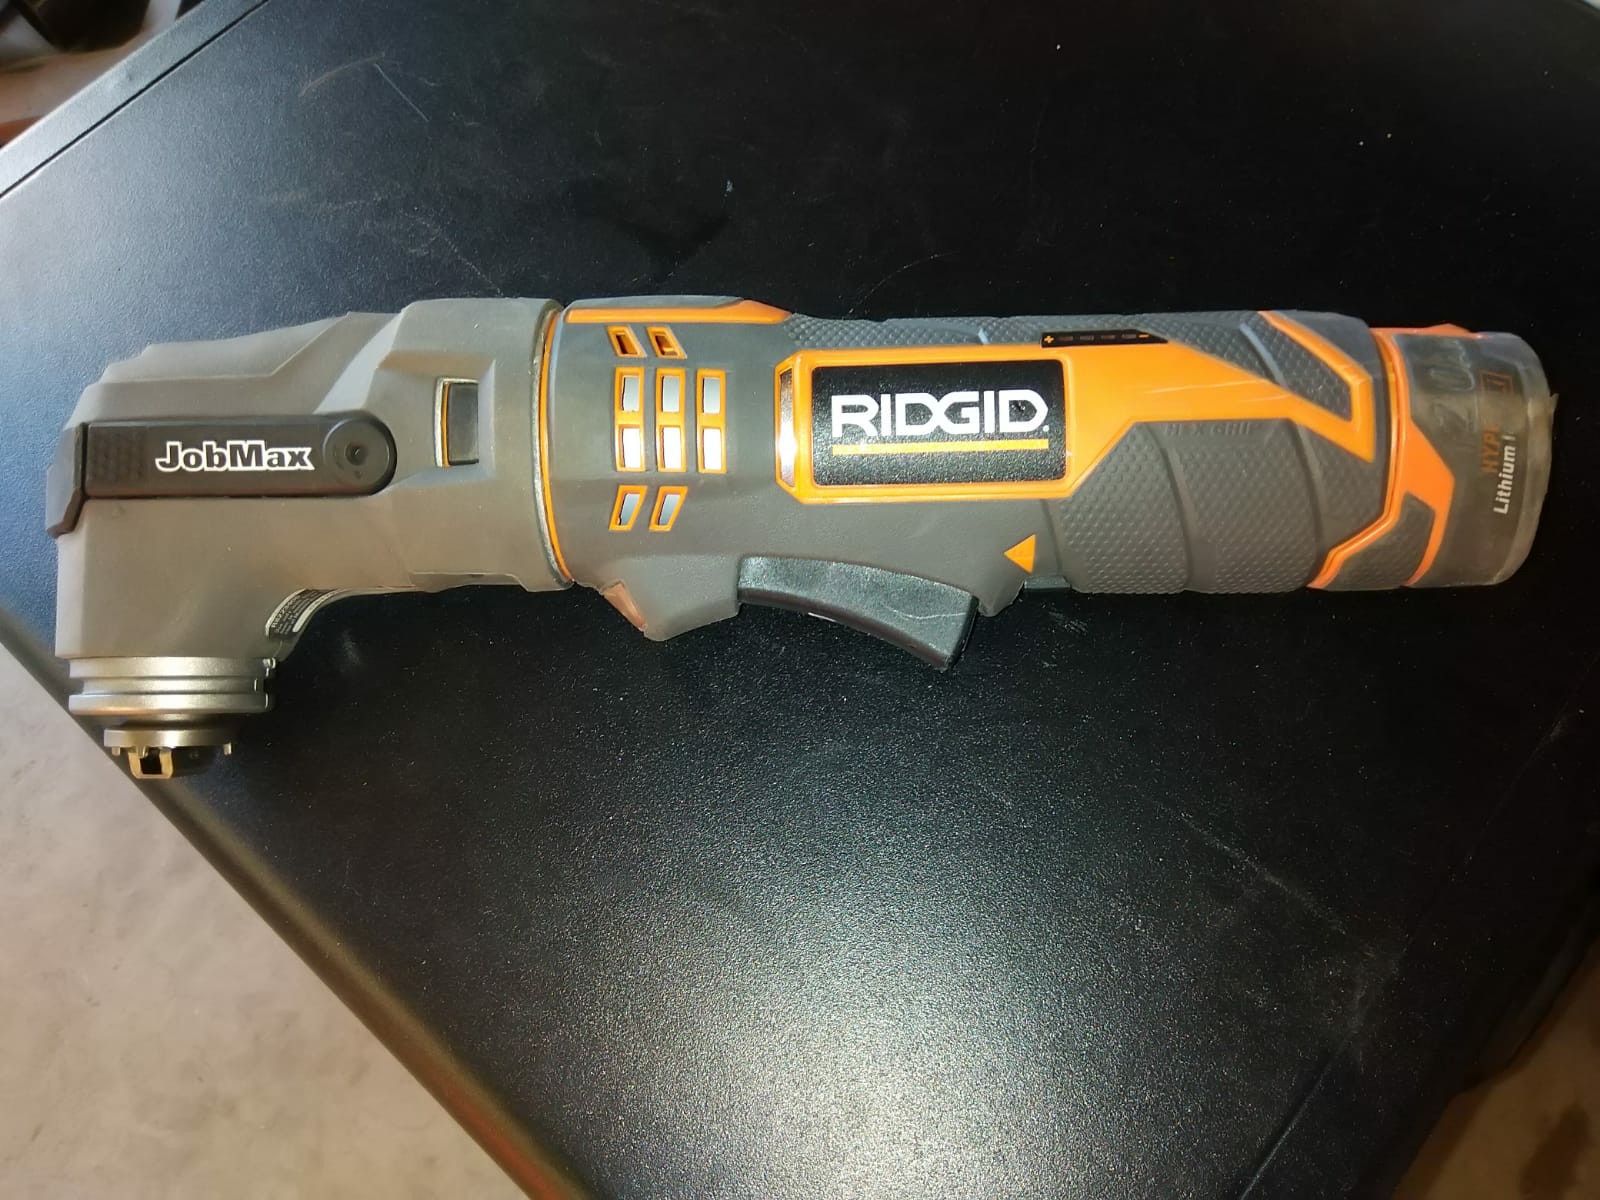 MULTITOOL RIDGID BATTERY ANDREW CHARGER INCLUDED